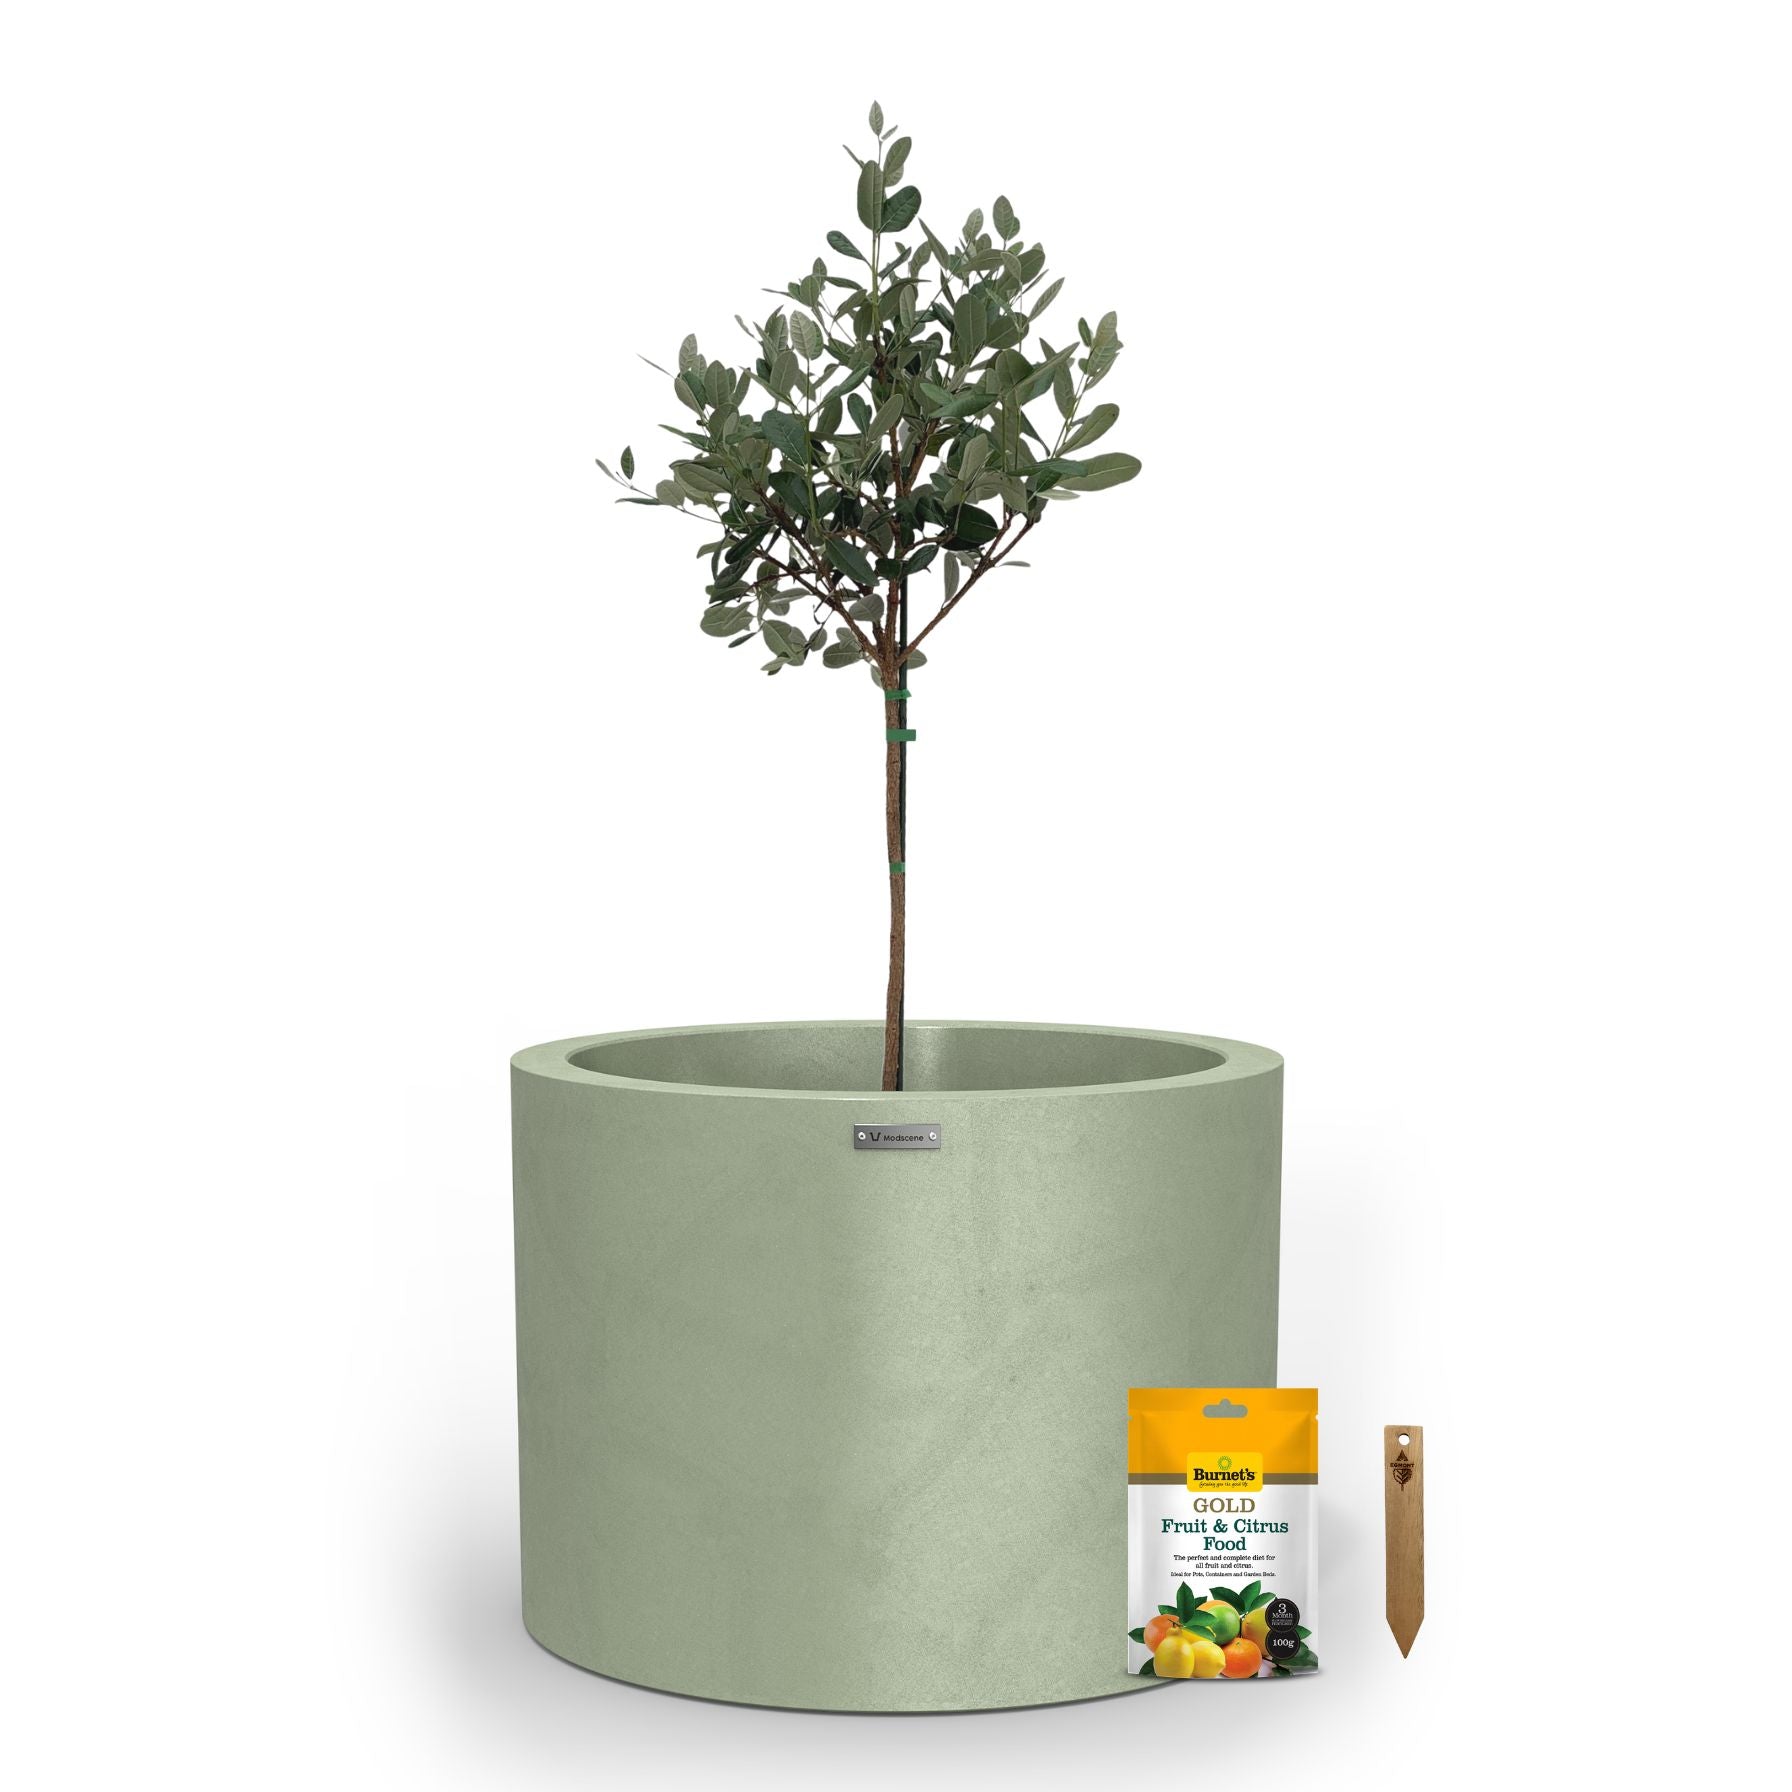 A large mist green planter pot used to plant fruit trees. 